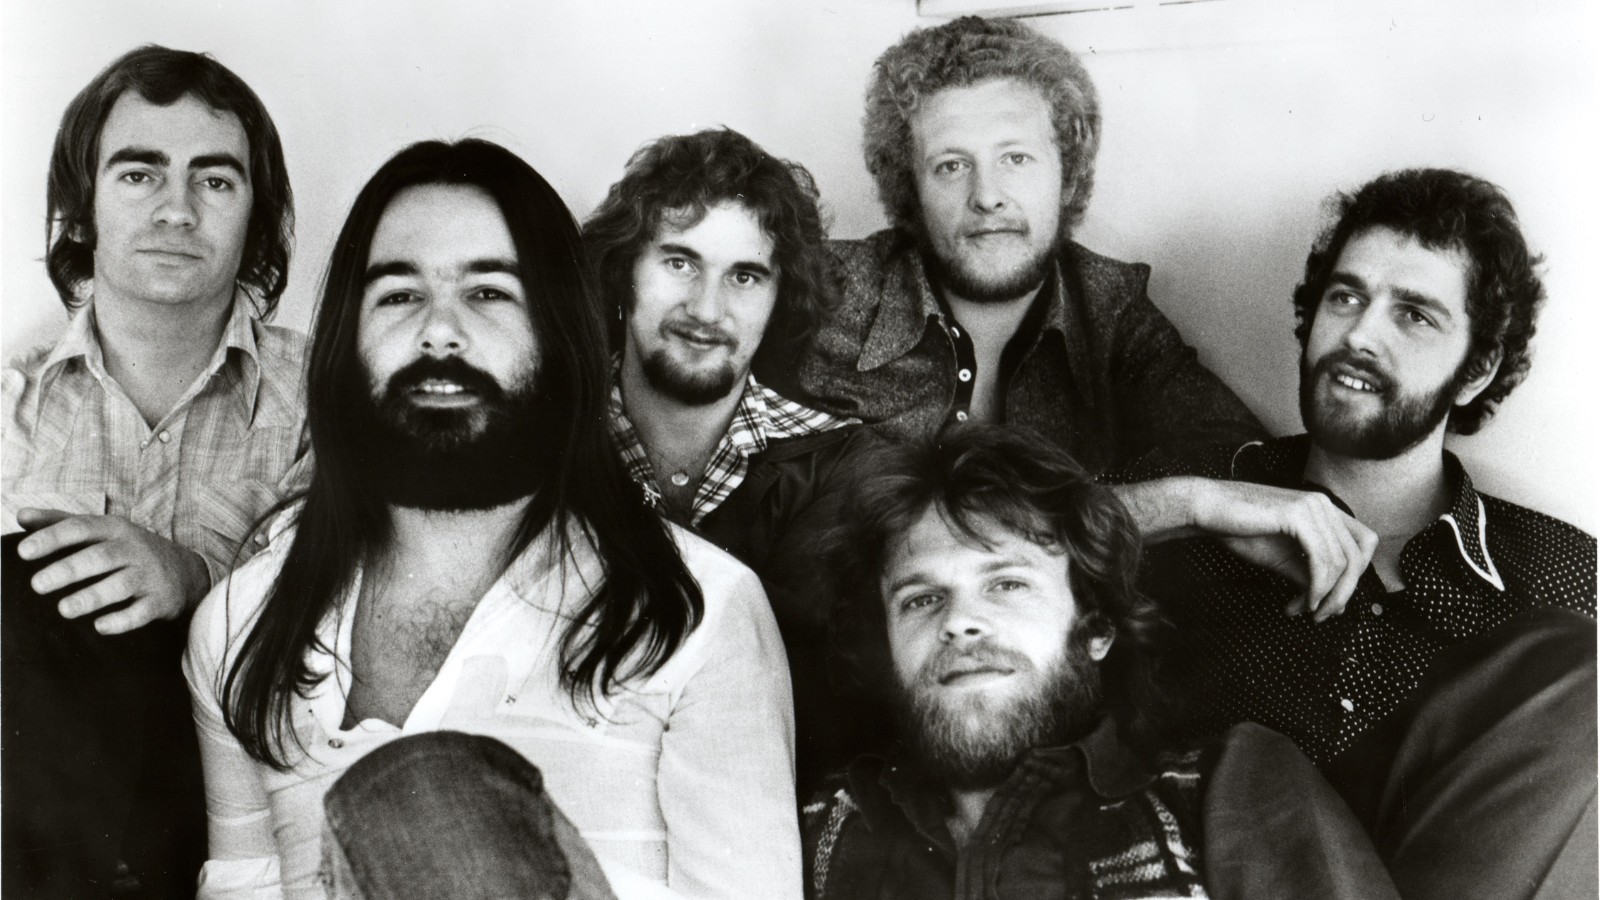 Black and white image of the Scottish band, Average White Band, who sit in a row smiling at the camera